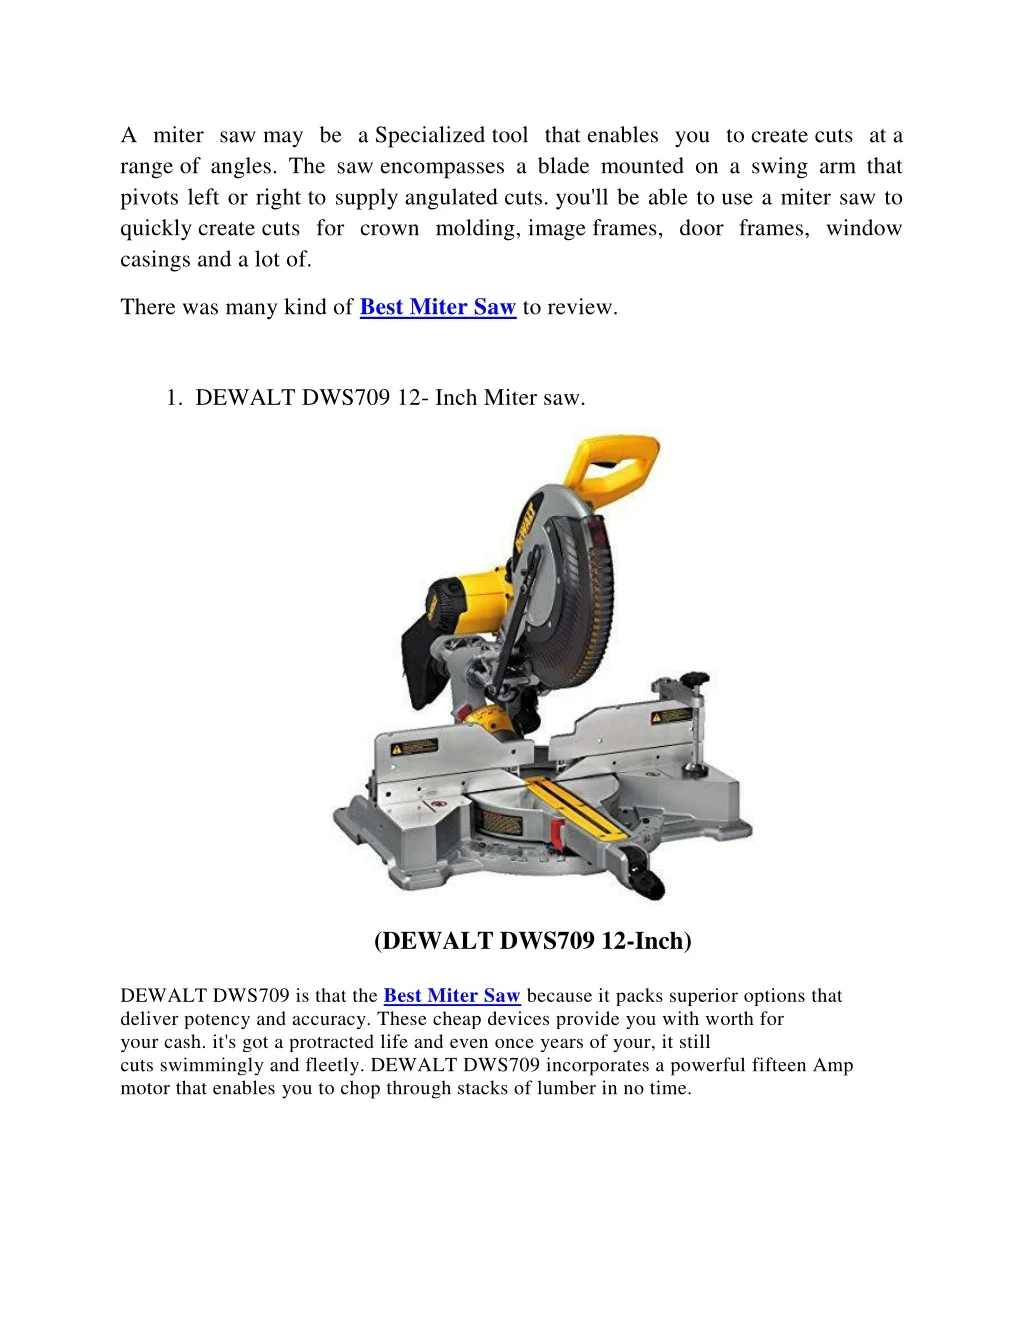 a miter saw may be a specialized tool that